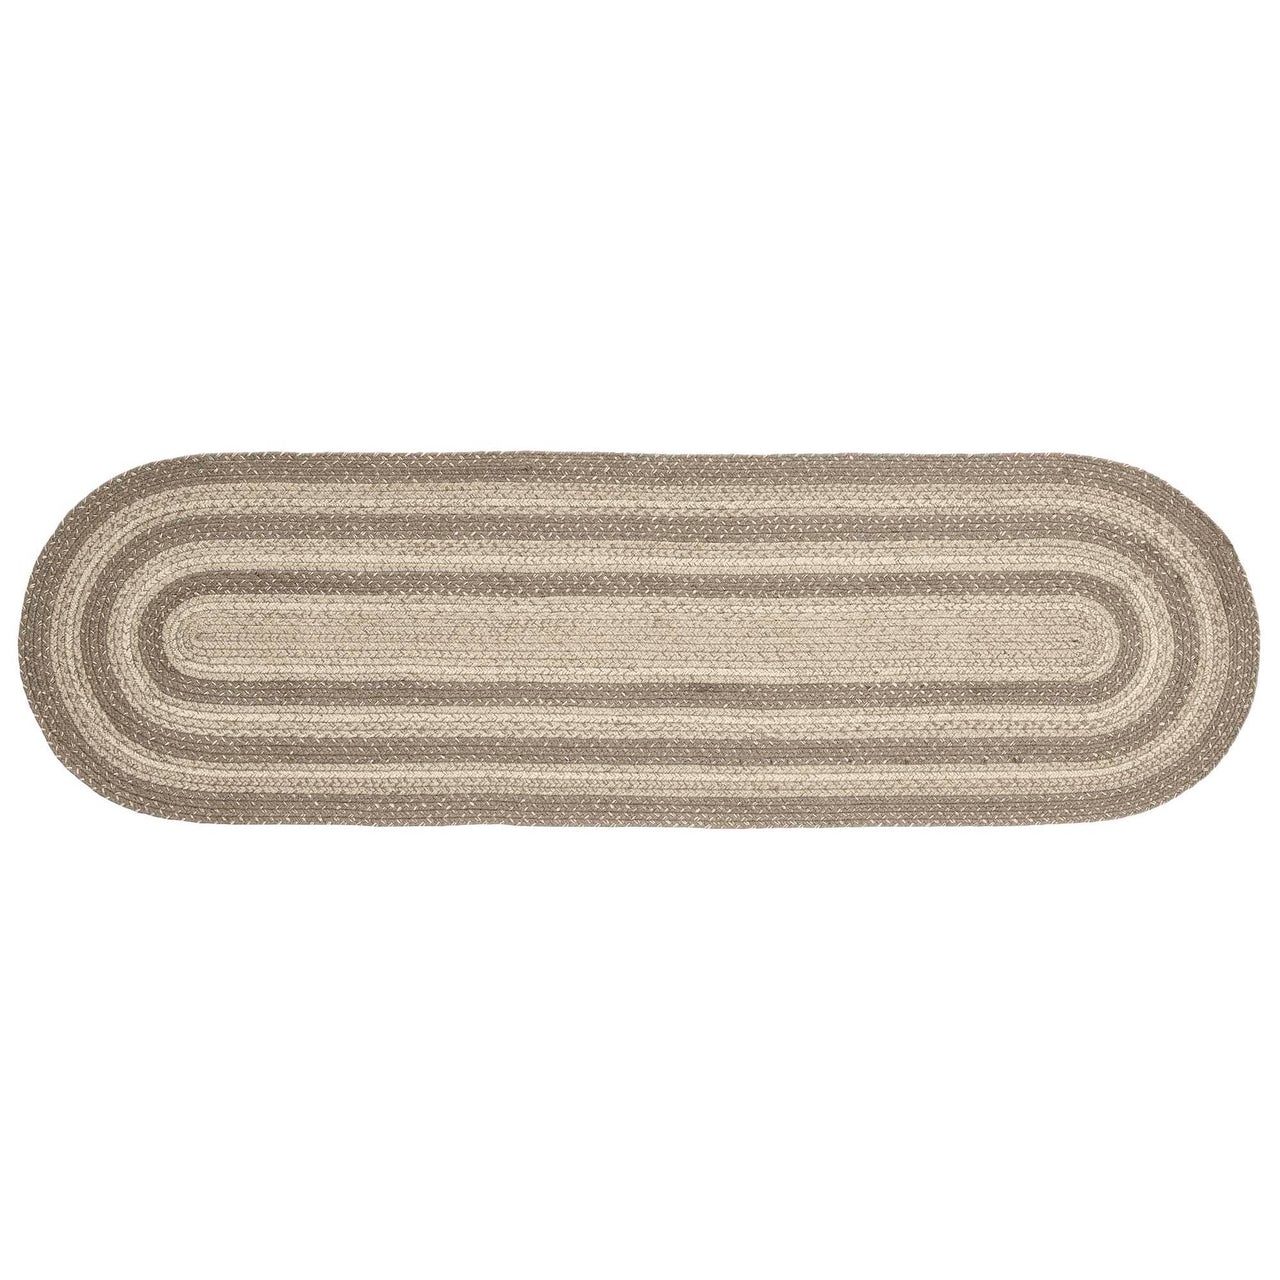 Cobblestone Jute Braided Rug/Runner Oval with Rug Pad 22"x72" VHC Brands